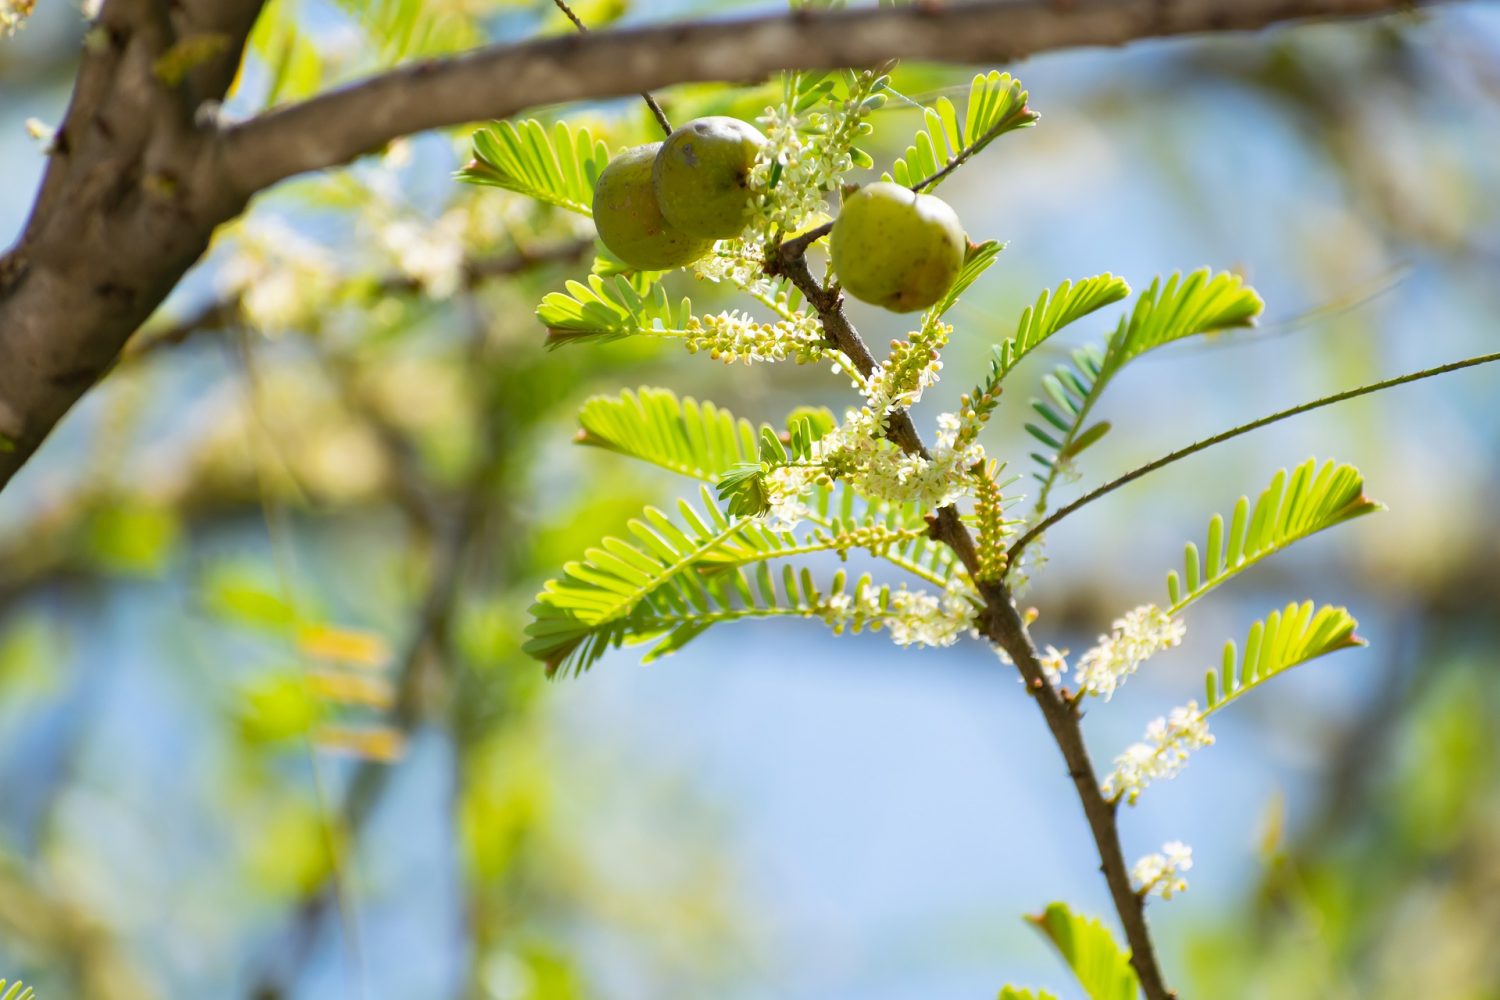 Amla benefits, uses and side effects